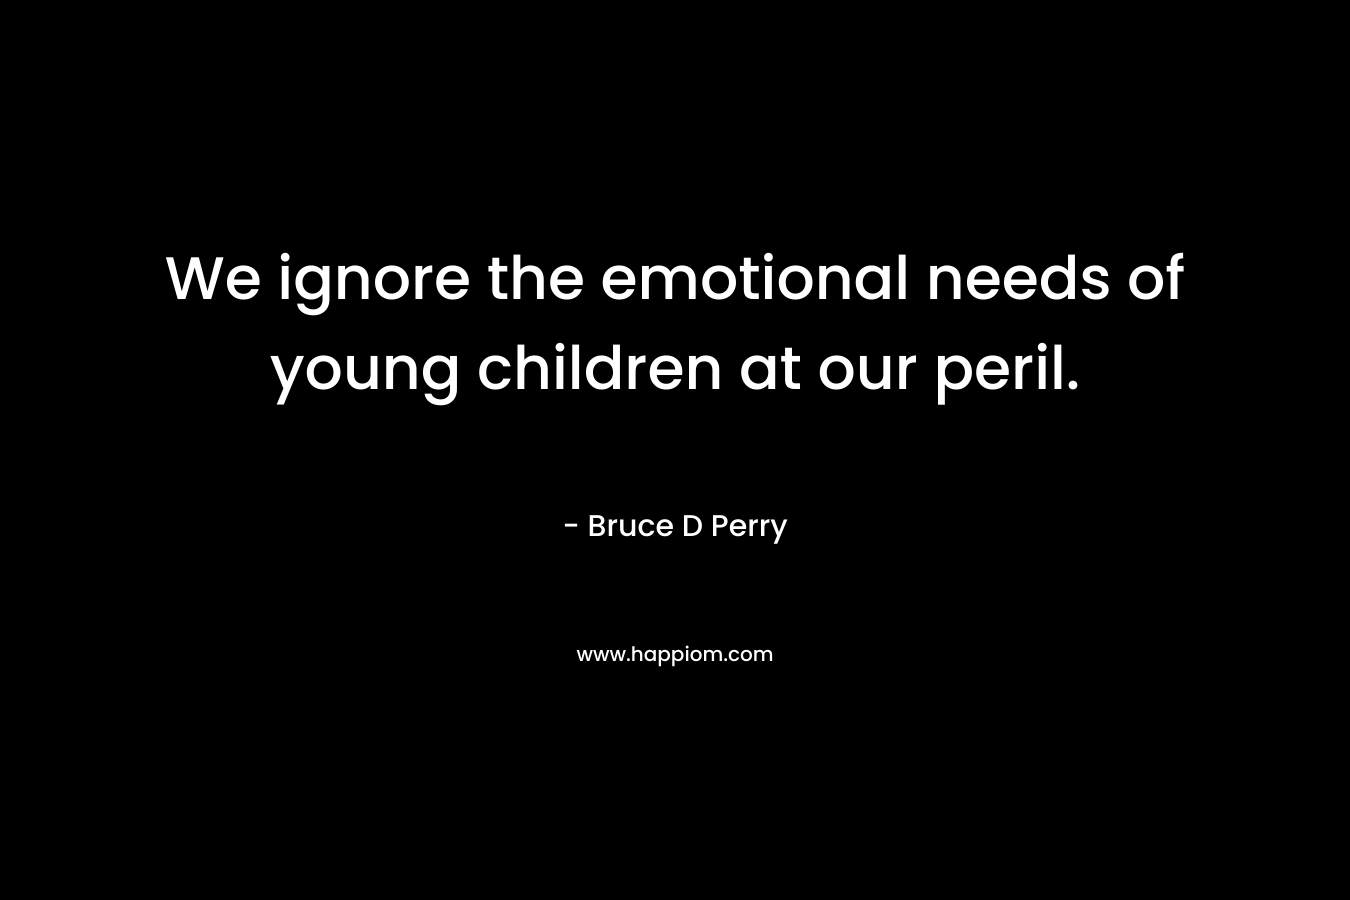 We ignore the emotional needs of young children at our peril.